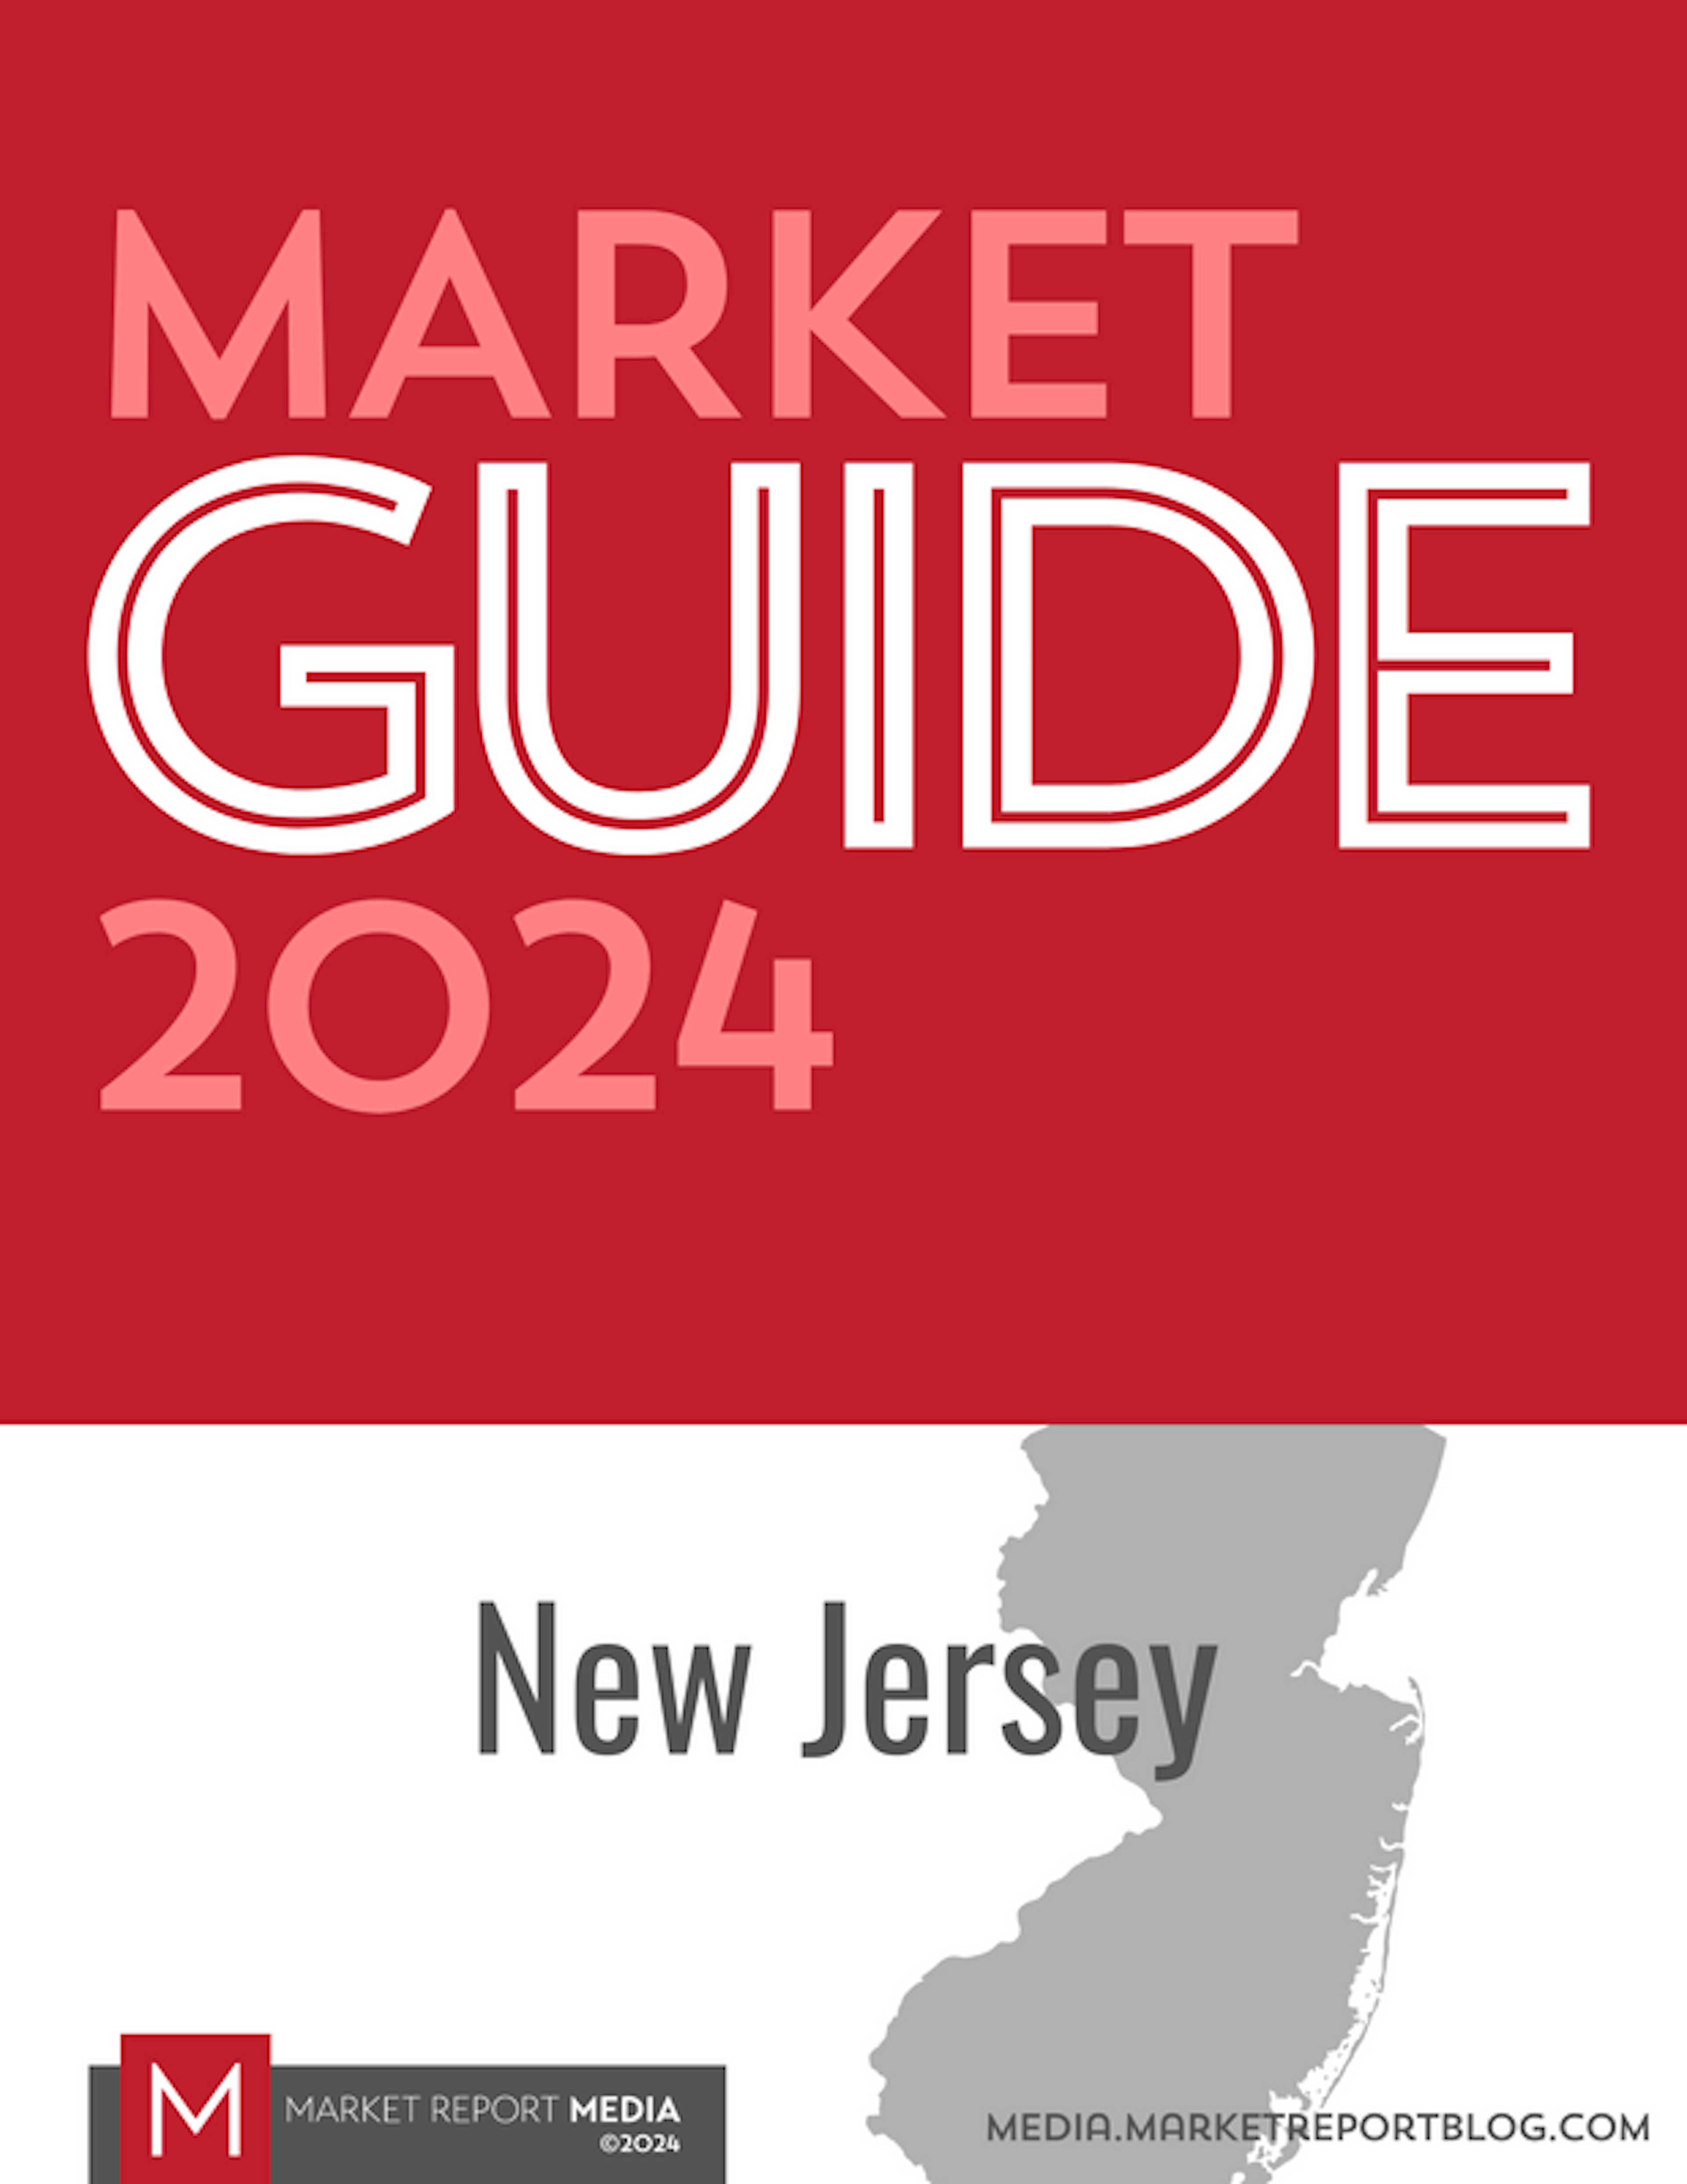 Market Guide 2024 - New Jersey